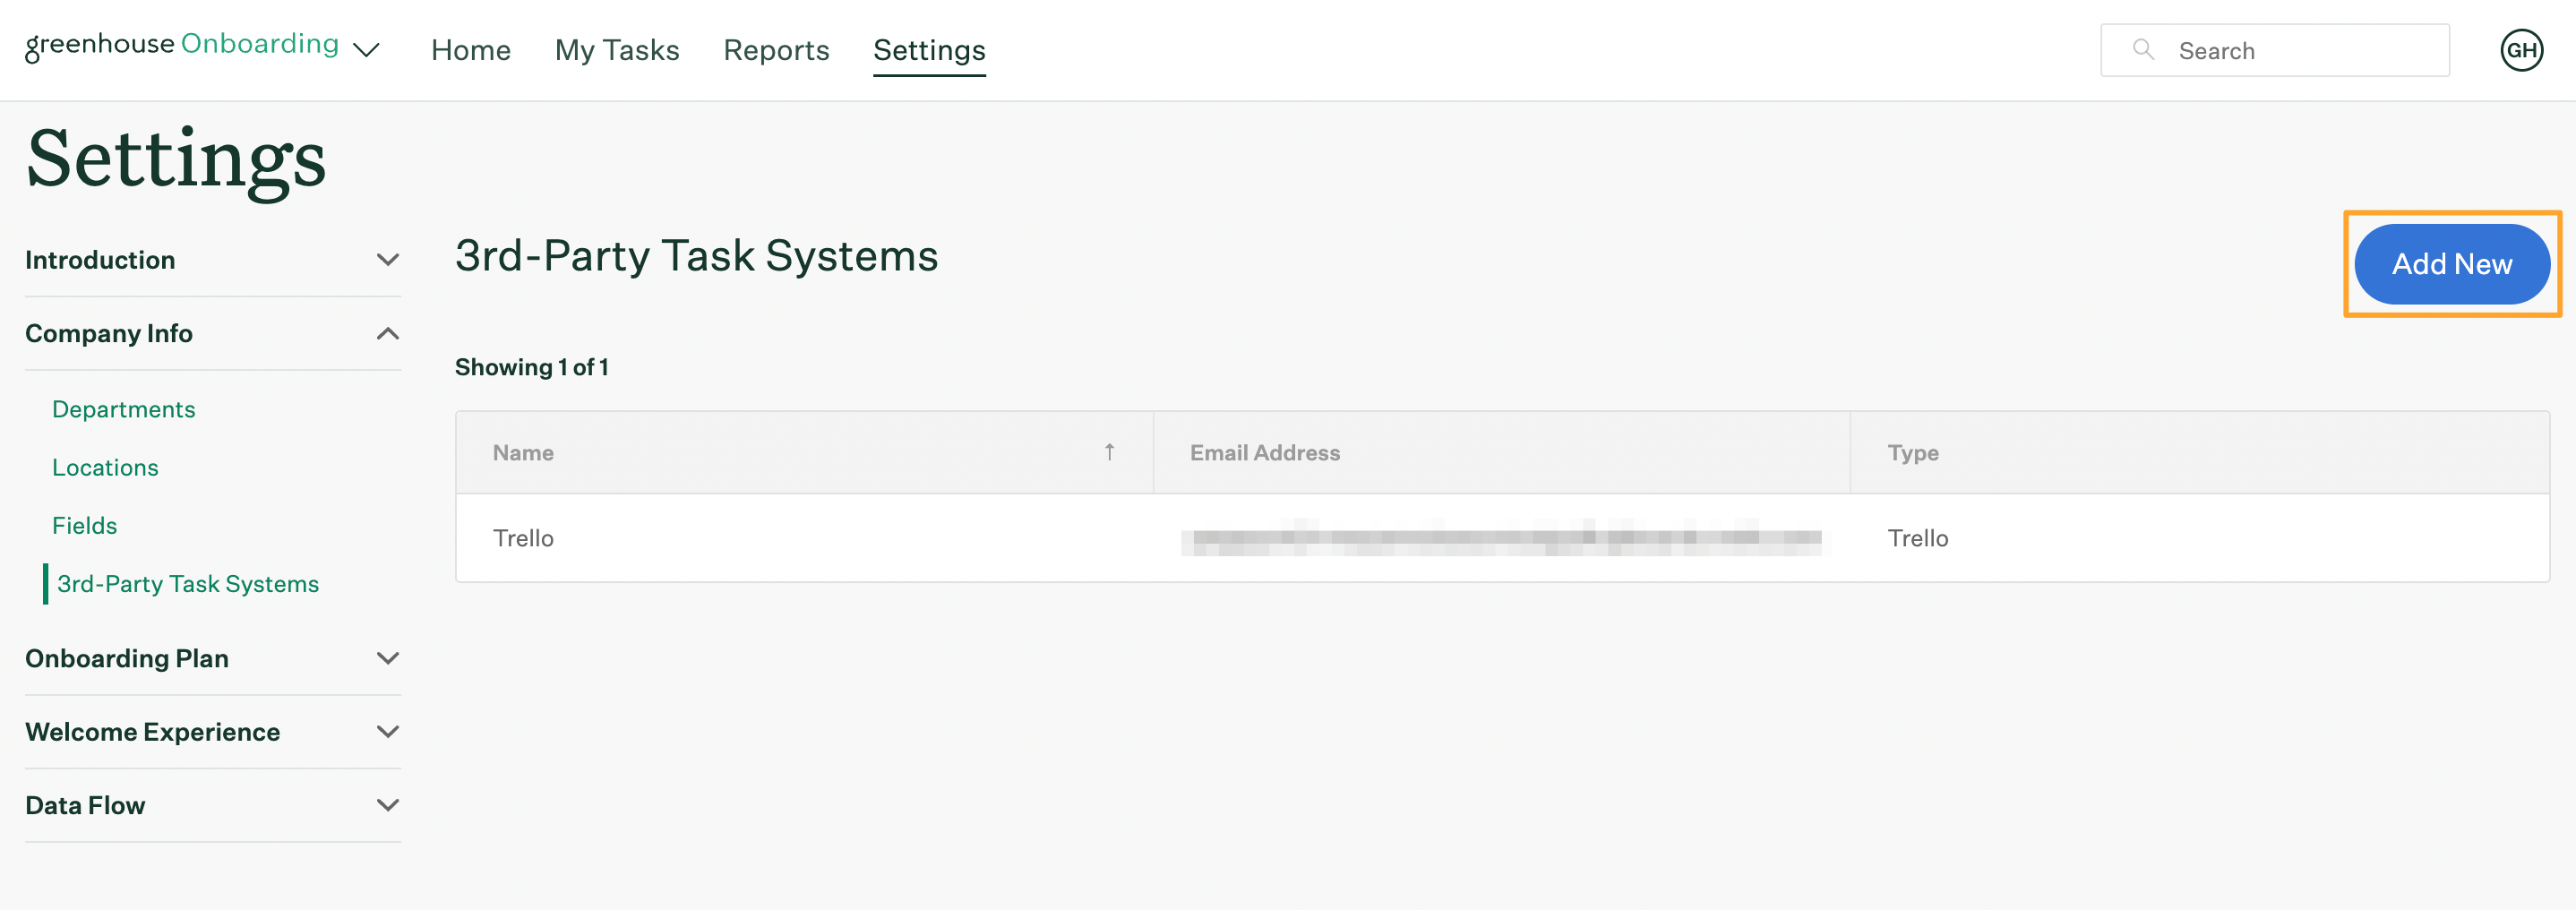 3rd party task systems page in Greenhouse Onboarding Settings with Add new button highlighted